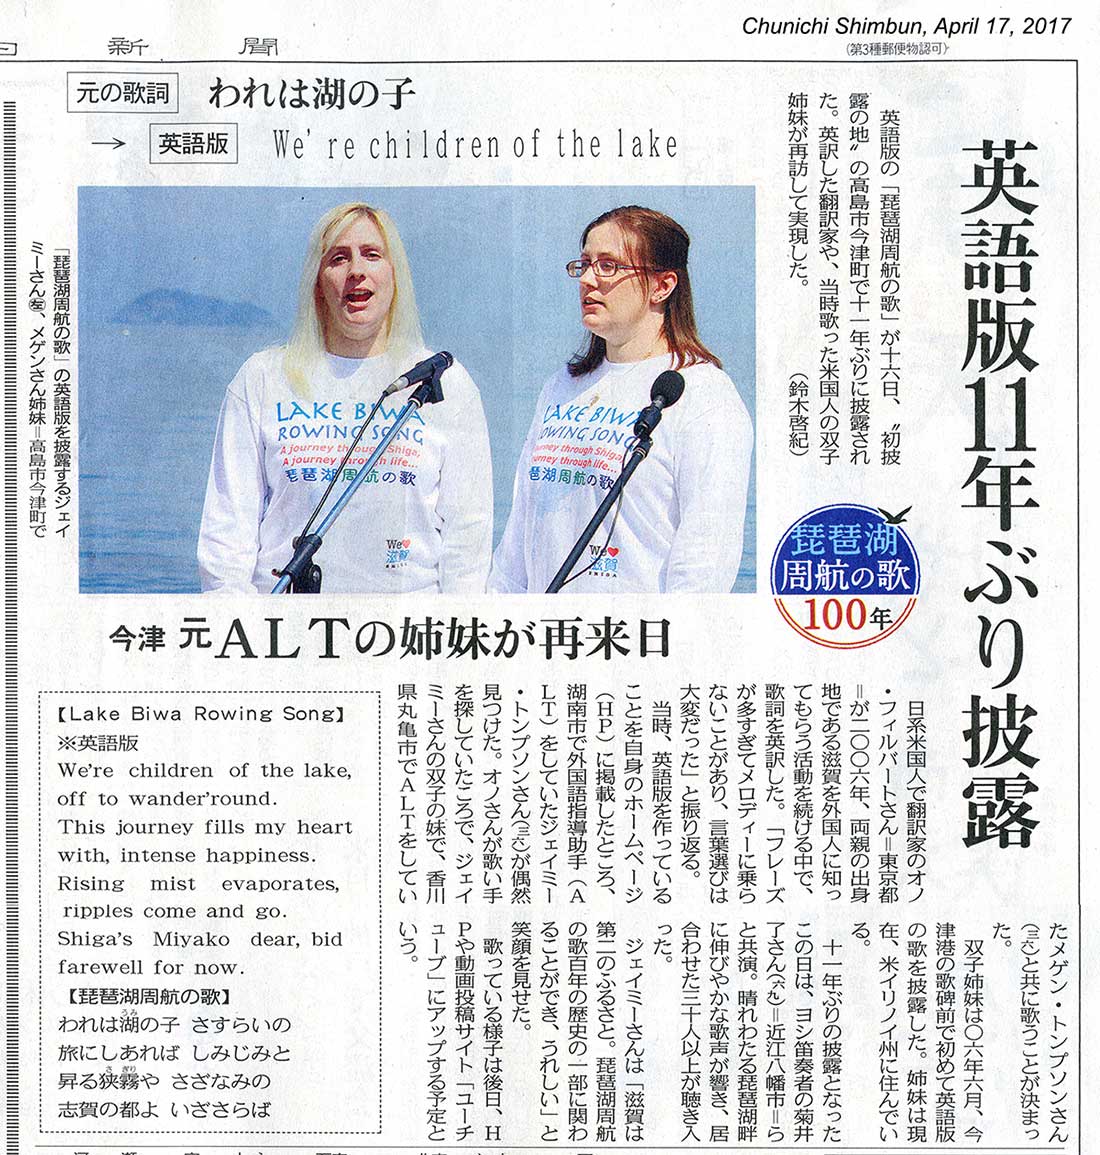 Chunichi Shimbun article (April 17, 2017) about our Lake Biwa Rowing Song mini concert held in Imazu on April 16, 2017. 
See videos of this event here: https://youtu.be/9G94IppUiiE
https://youtu.be/PjnY67sIcqE
Keywords: lake biwa rowing song newspaper article